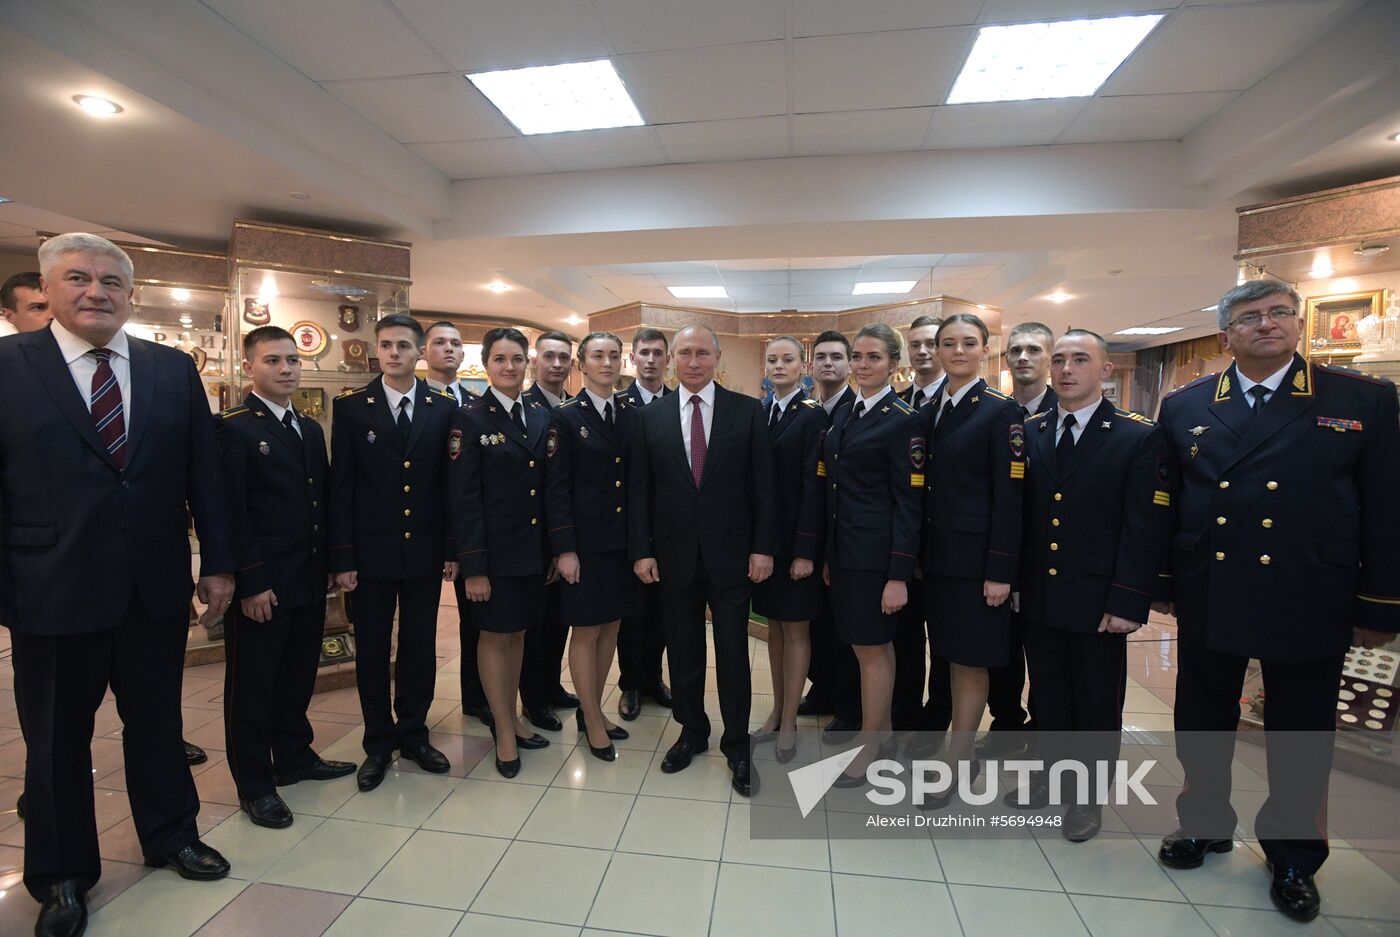 President Putin visits Moscow University of Russia's Interior Ministry